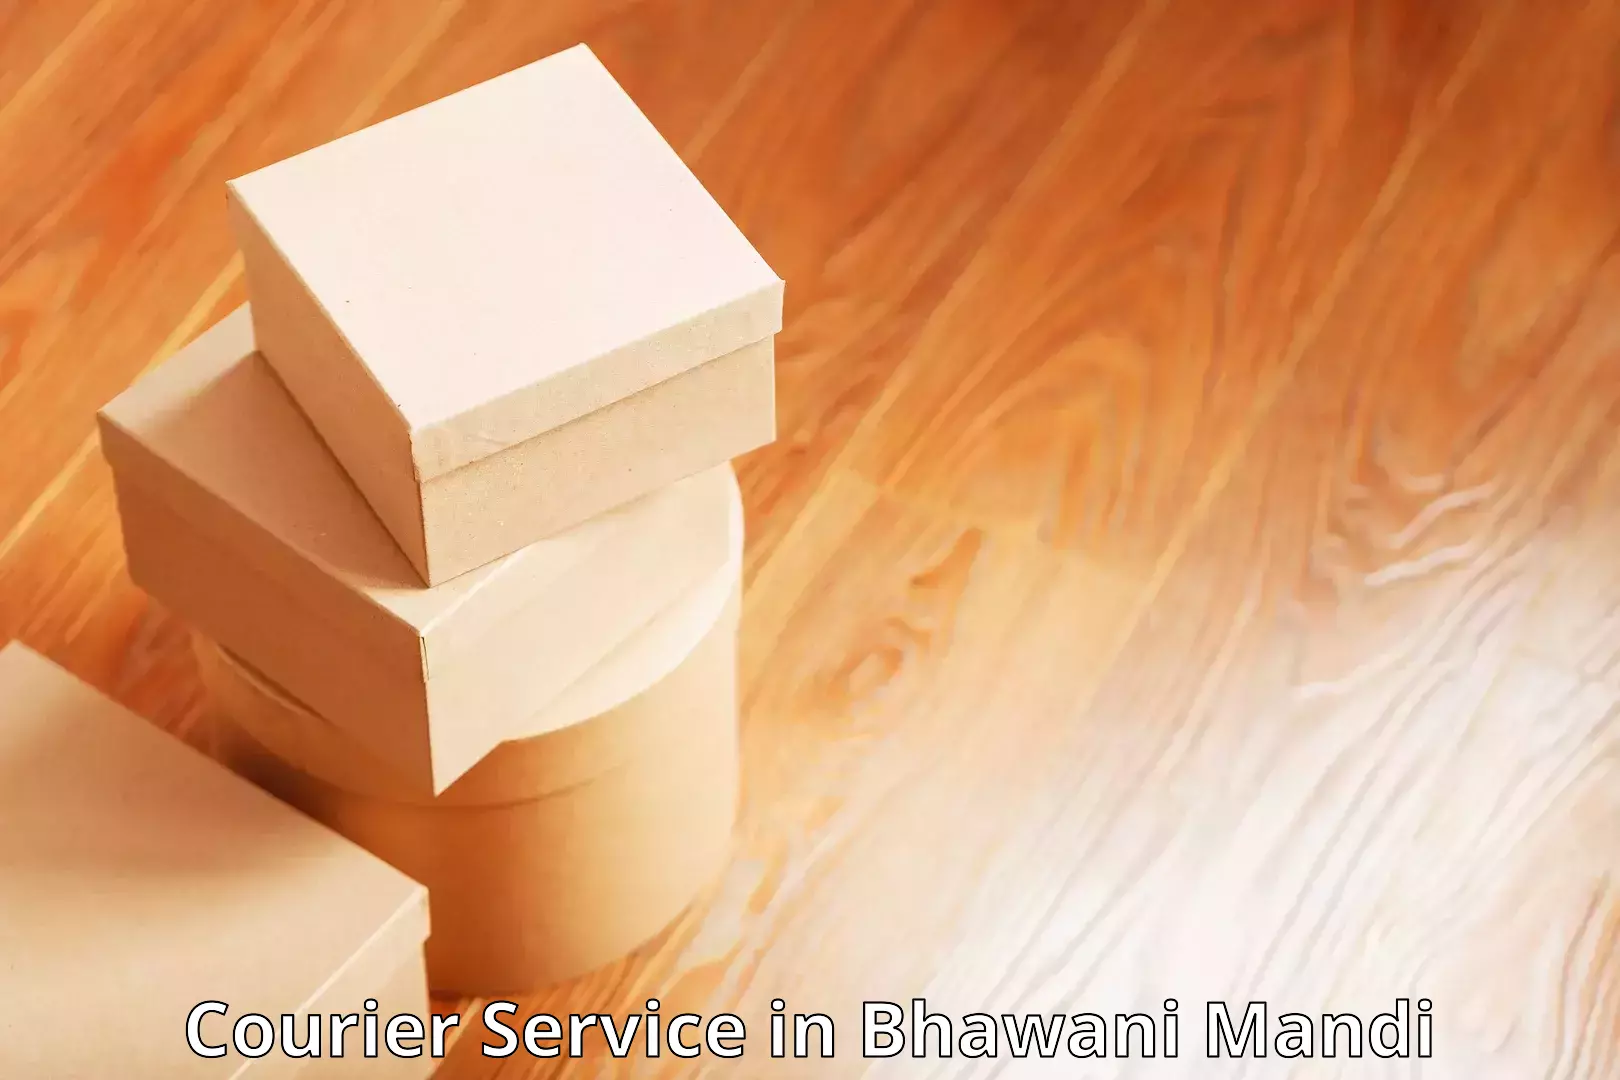 Next-generation courier services in Bhawani Mandi